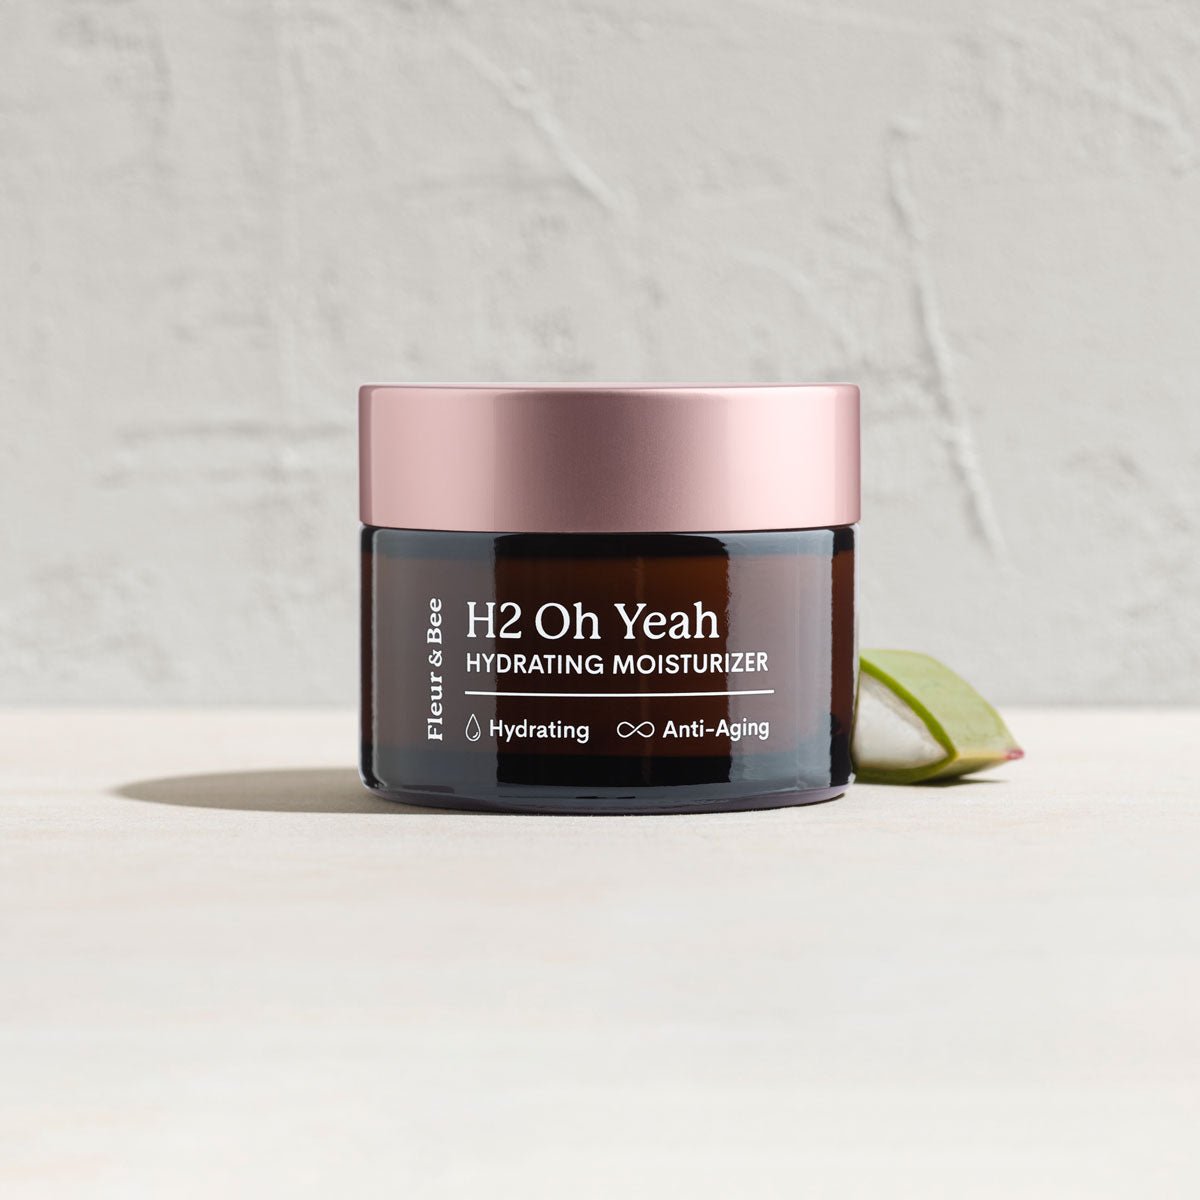 H2 Oh Yeah, a natural hydrating moisturizer by Fleur & Bee